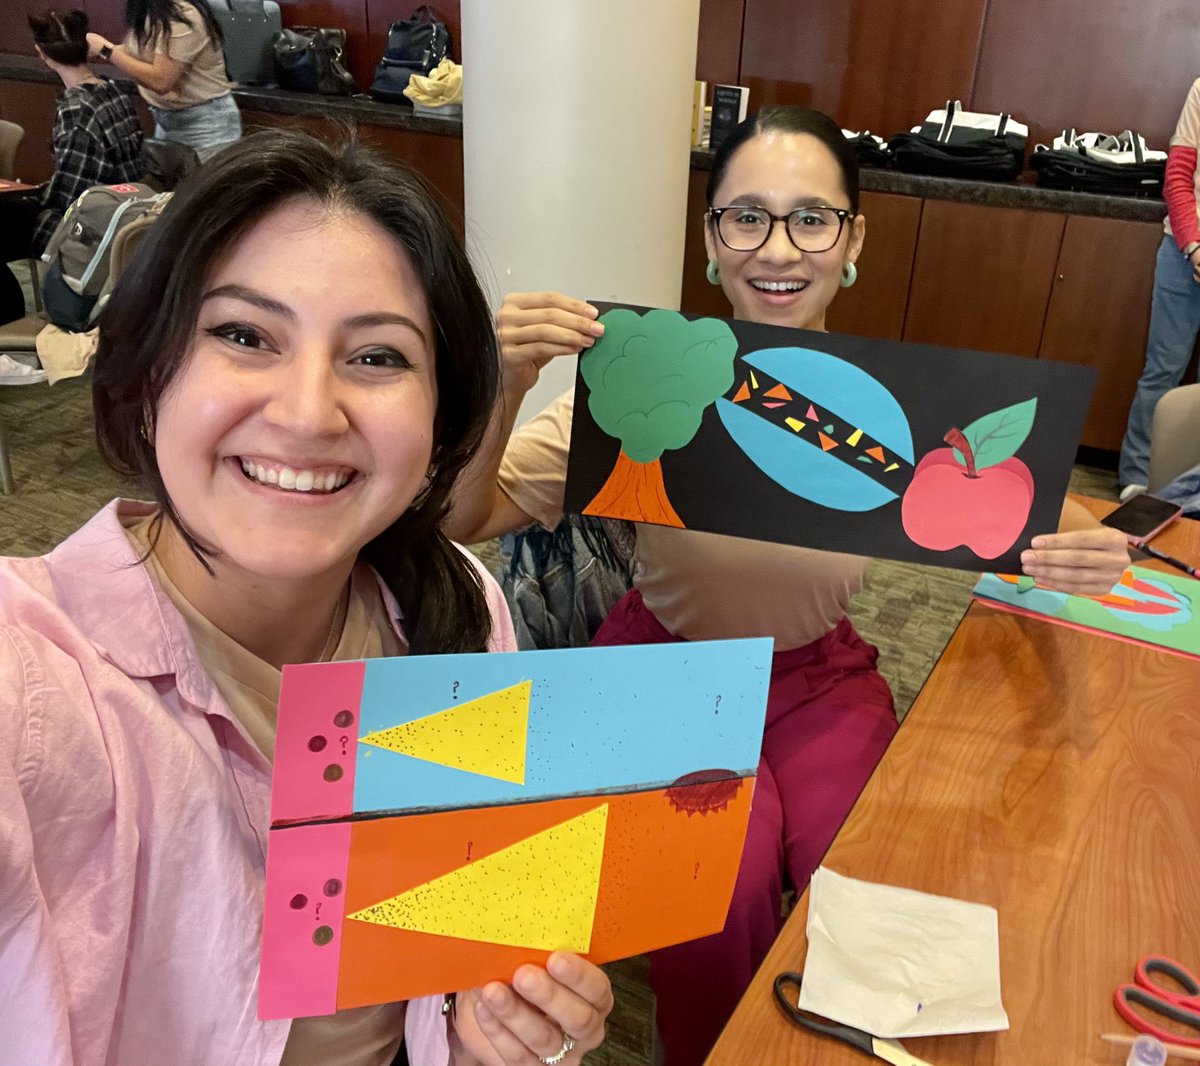 Last weekend was such an exciting and insightful time with my colleagues at ComSciCon - ATL 2024. We went from learning techniques used in performing arts to making Play-Doh sculptures representing our research. Embracing the importance of science communication.